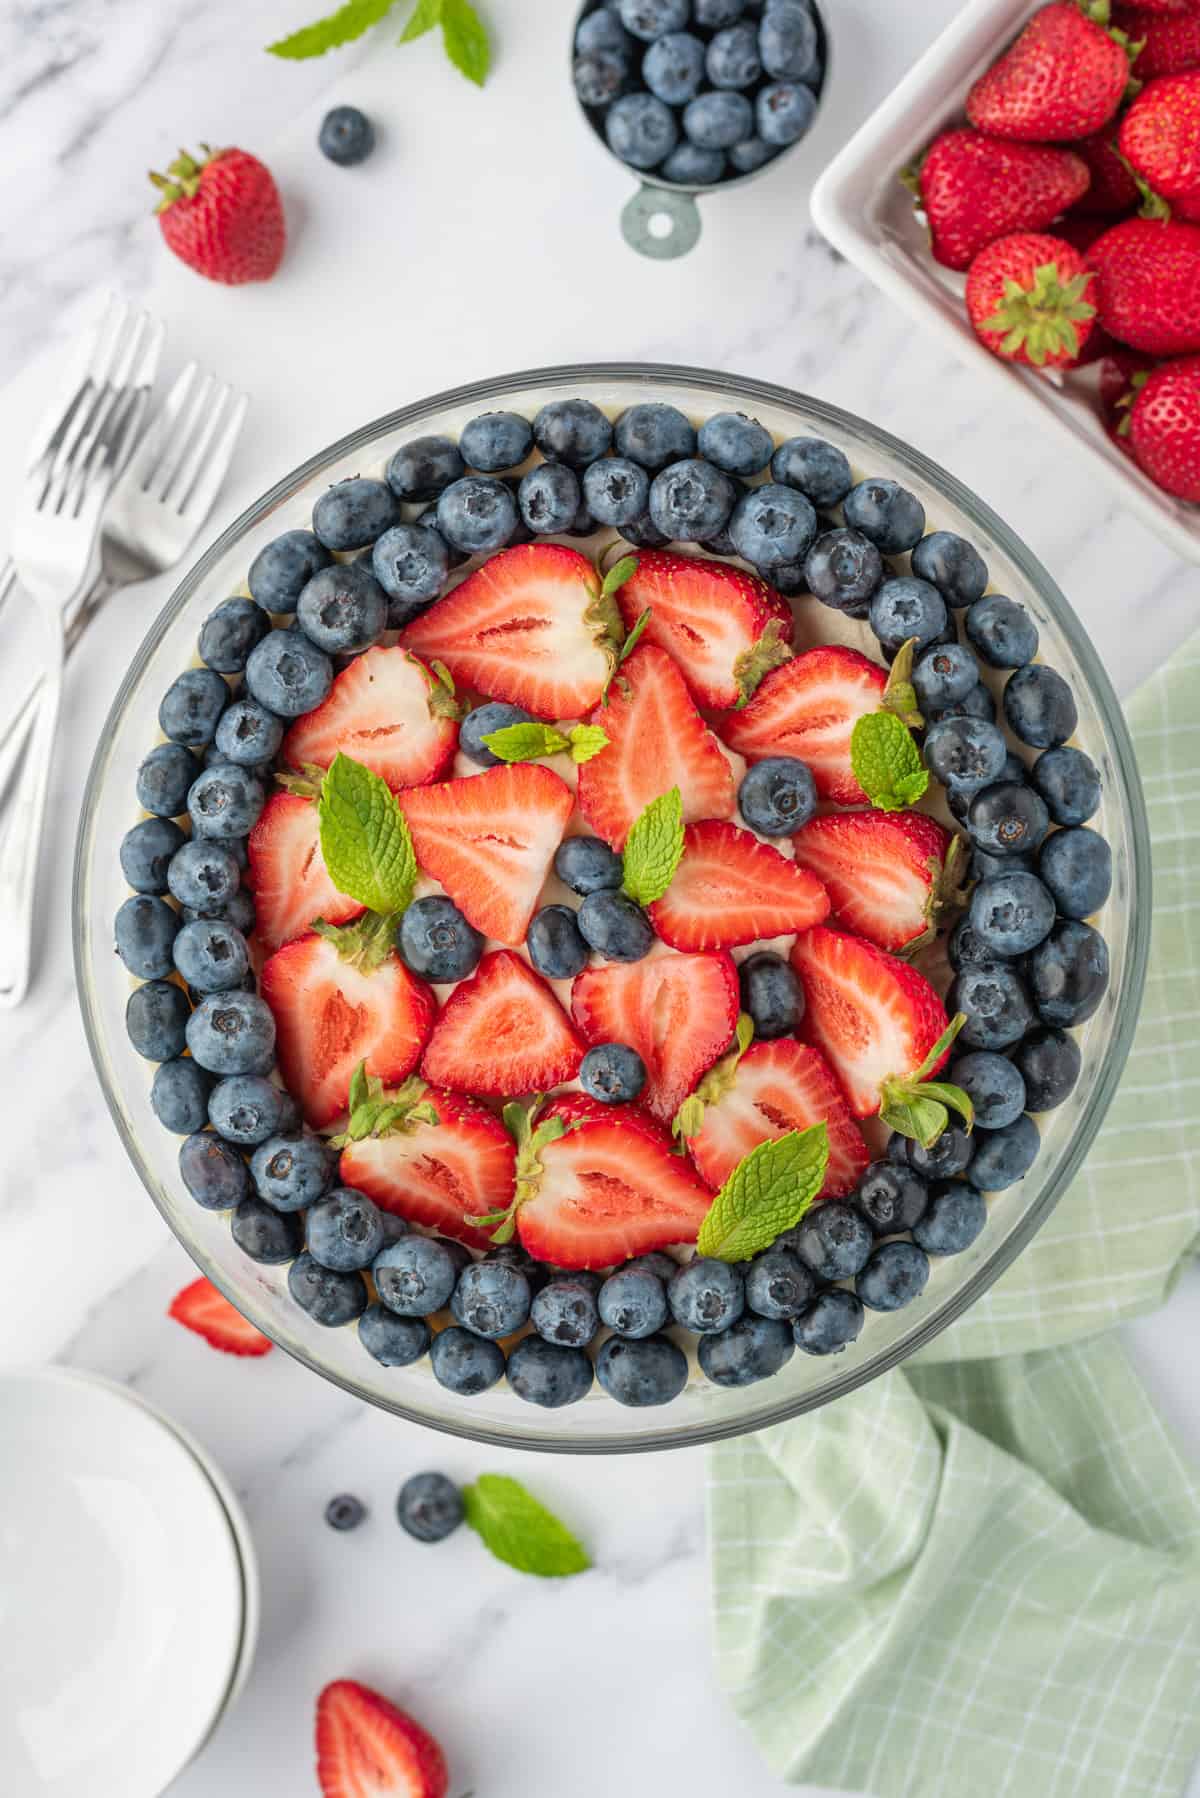 Blueberries and strawberries are placed on top of a trifle dish.